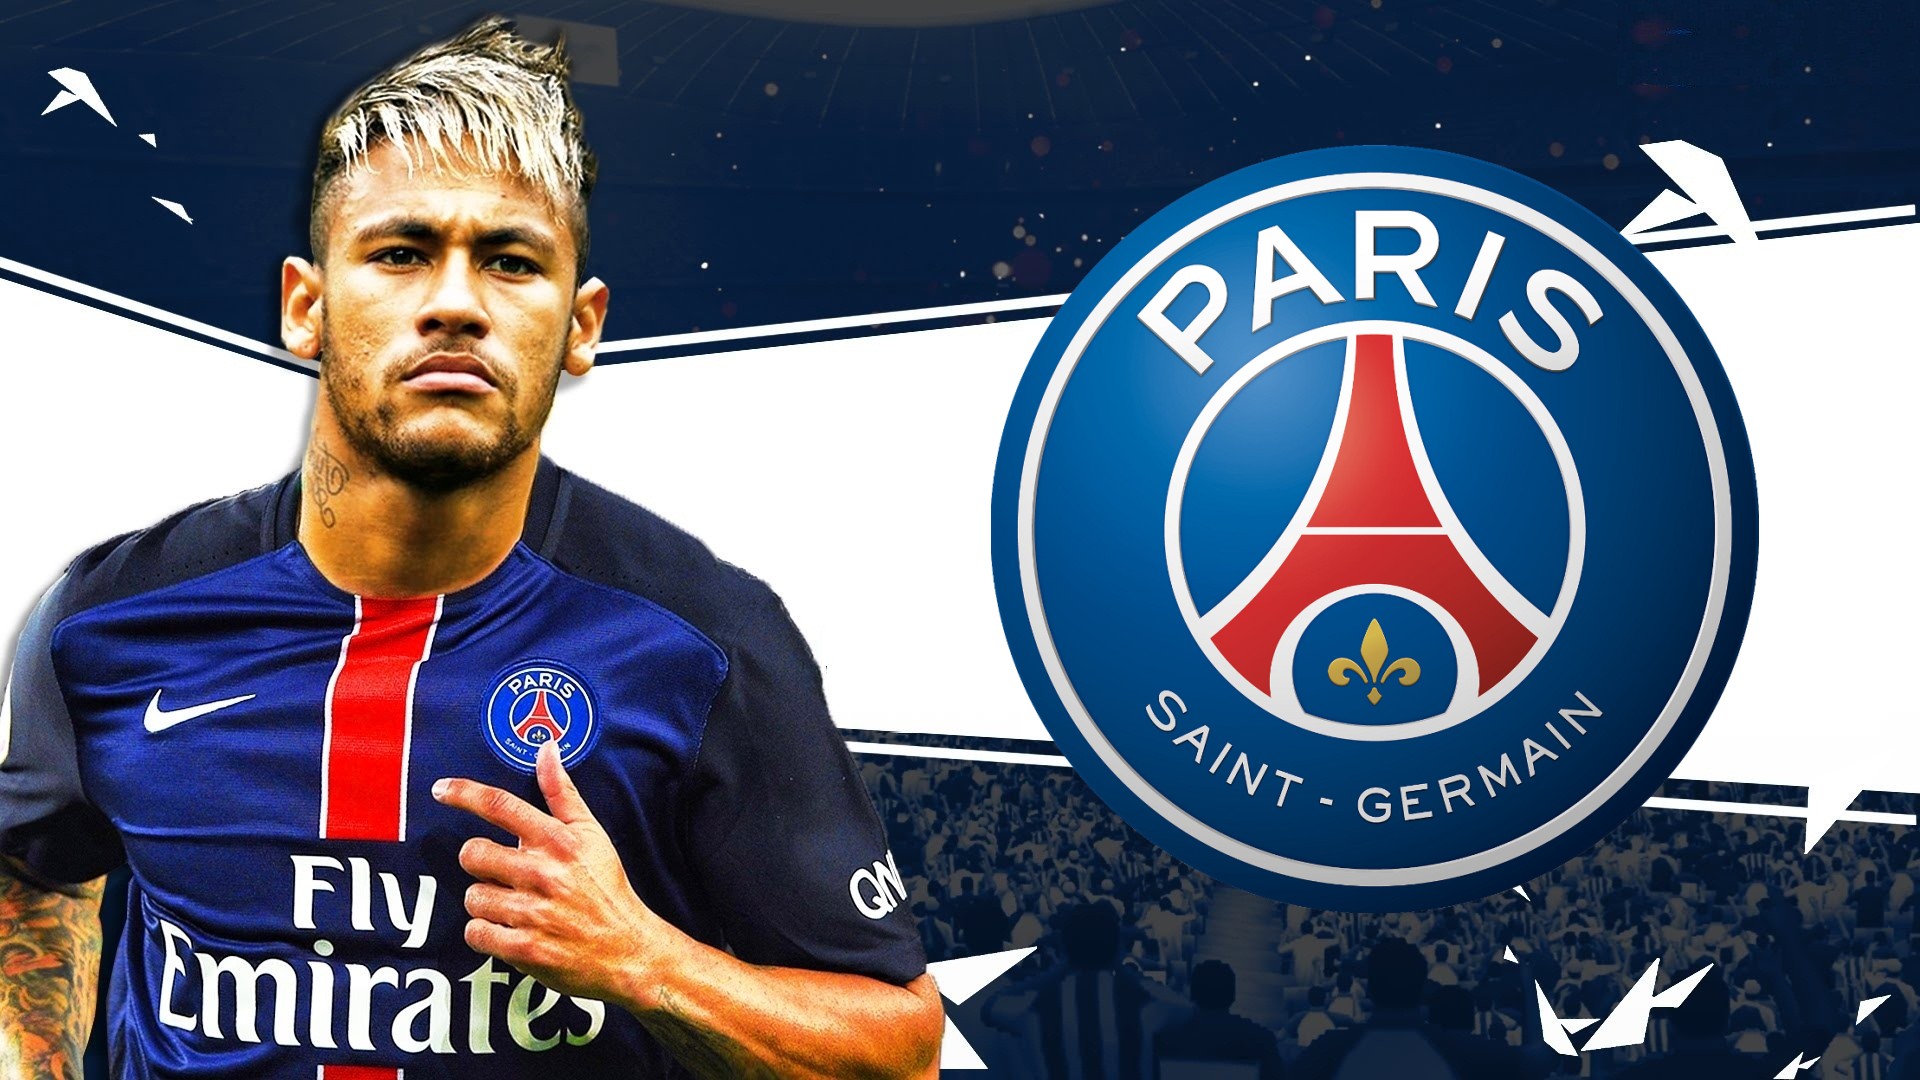 Neymar PSG Desktop Wallpapers with resolution 1920x1080 pixel. You can make this wallpaper for your Mac or Windows Desktop Background, iPhone, Android or Tablet and another Smartphone device